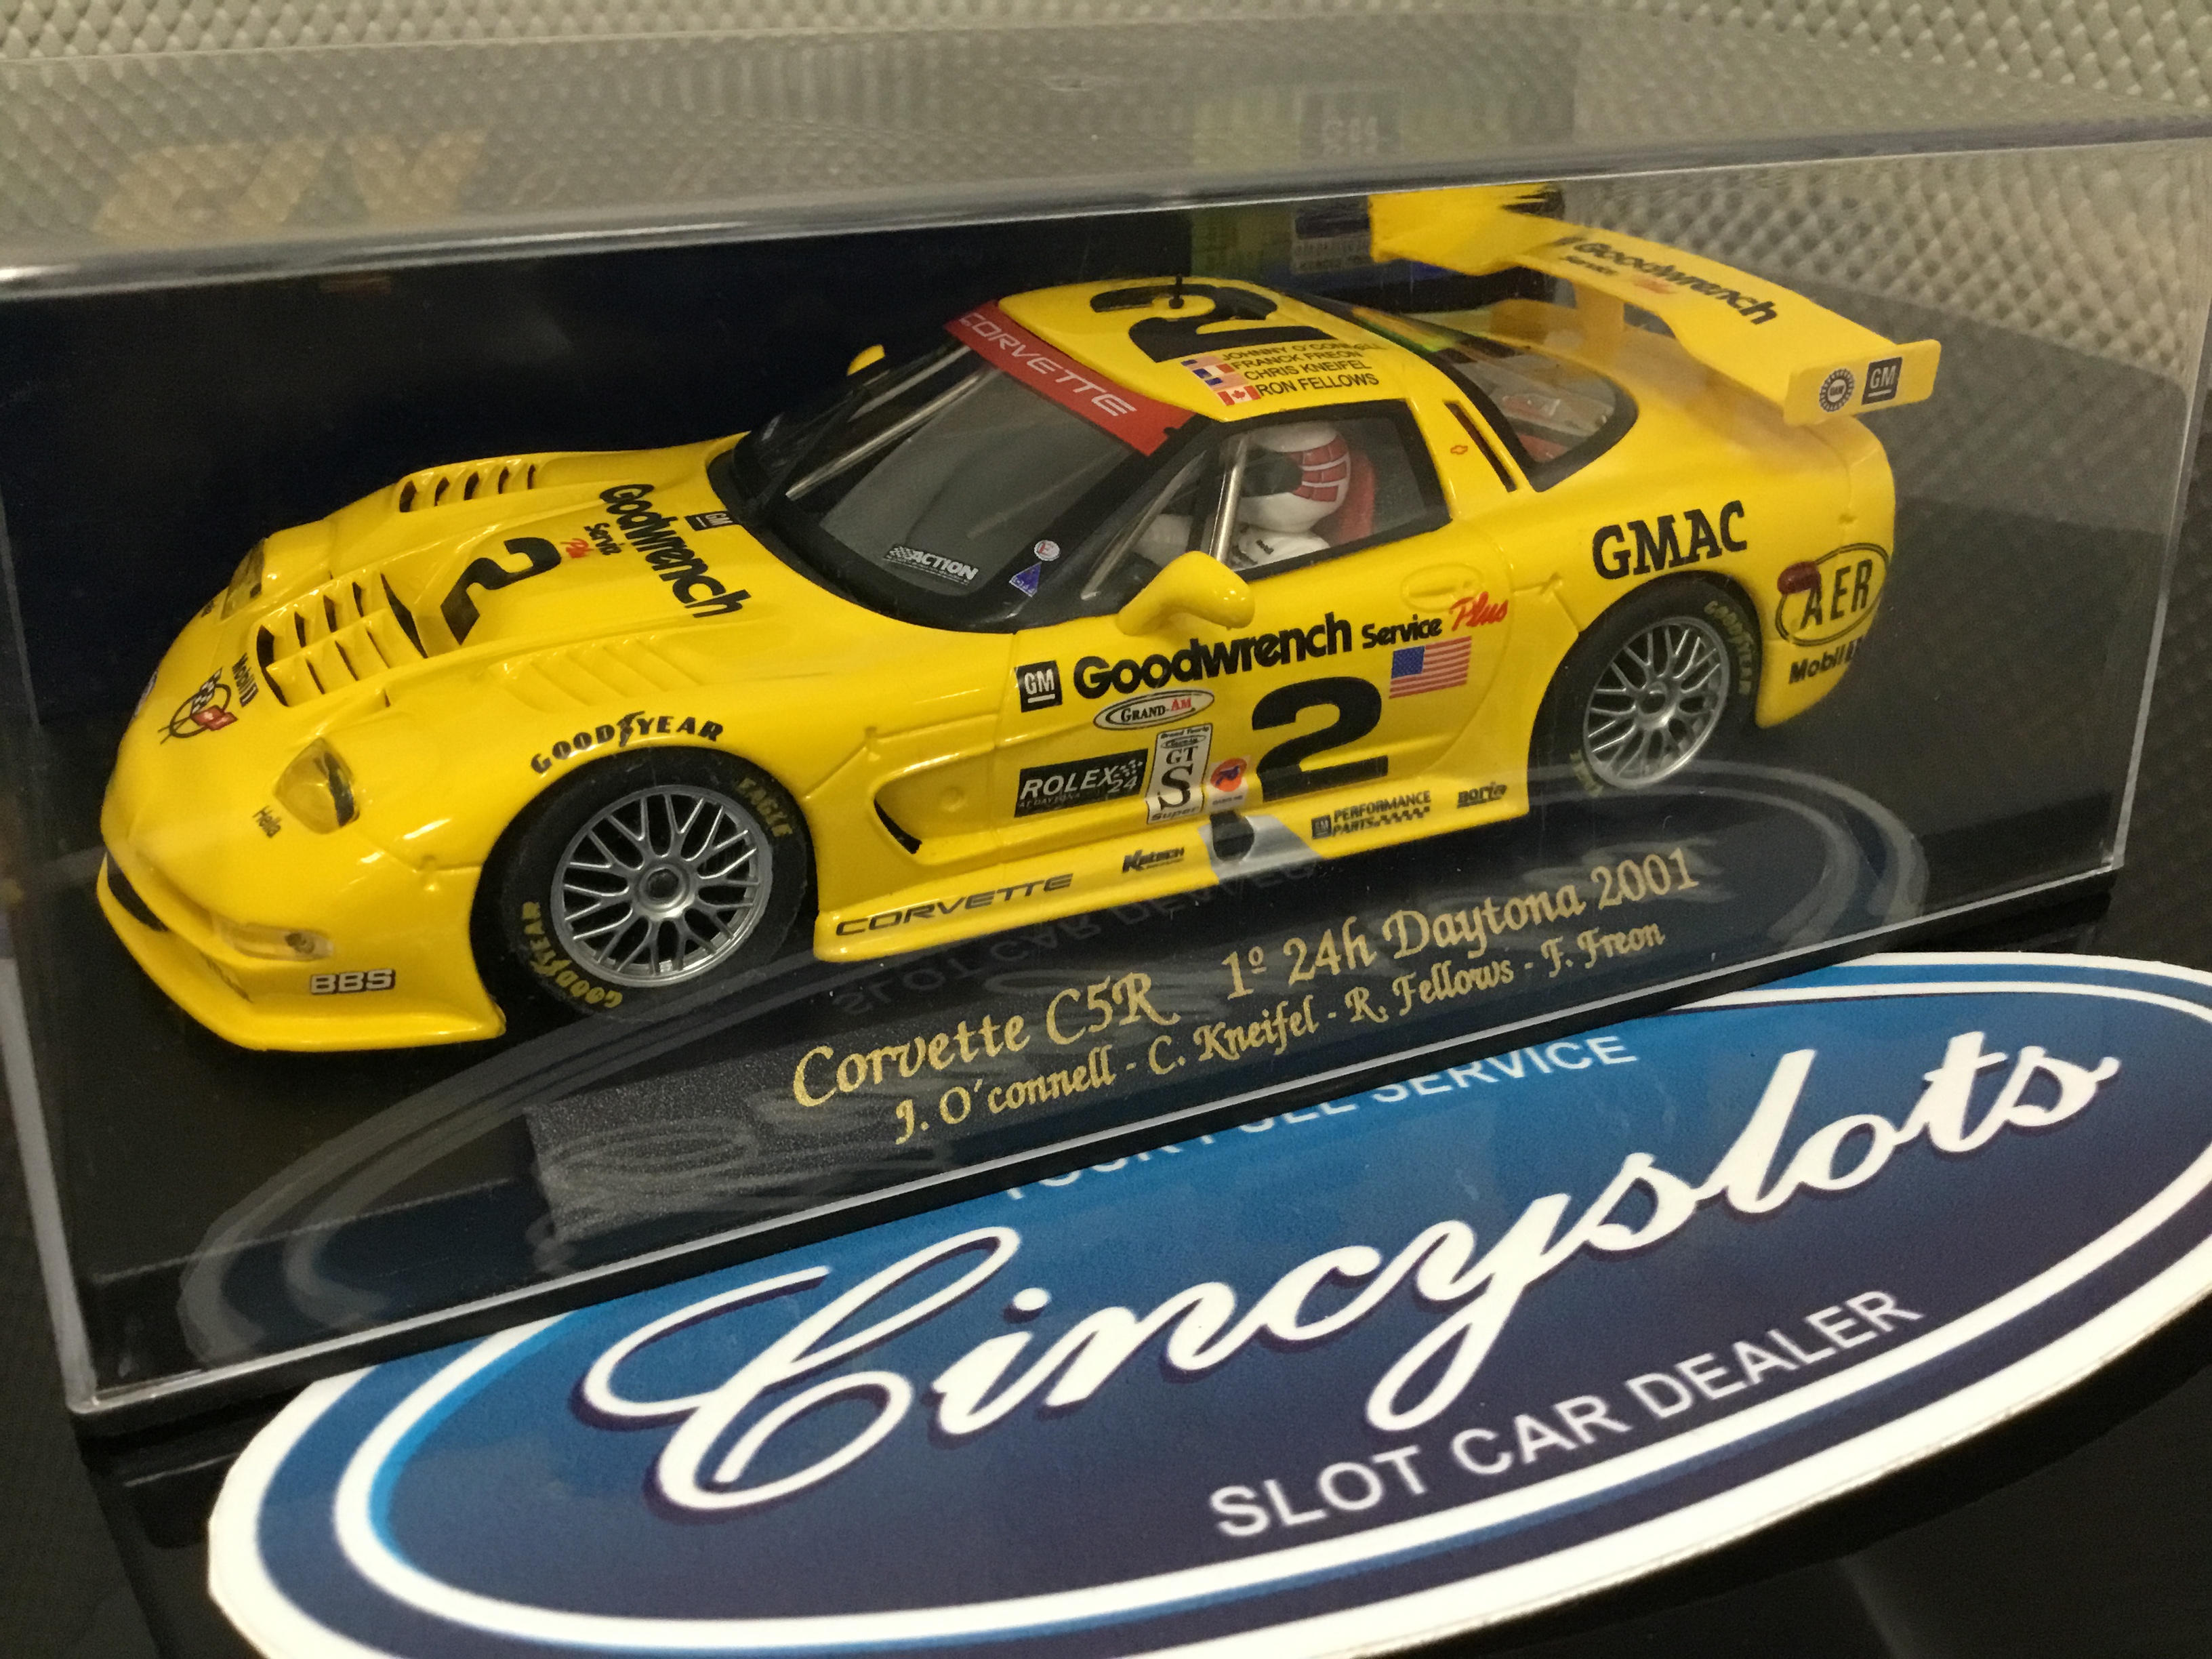 FLY A123 CORVETTE C5R 1ST PLACE DAYTONA 2001 NEW 1/32 SLOT CAR IN DISPLAY CASE 